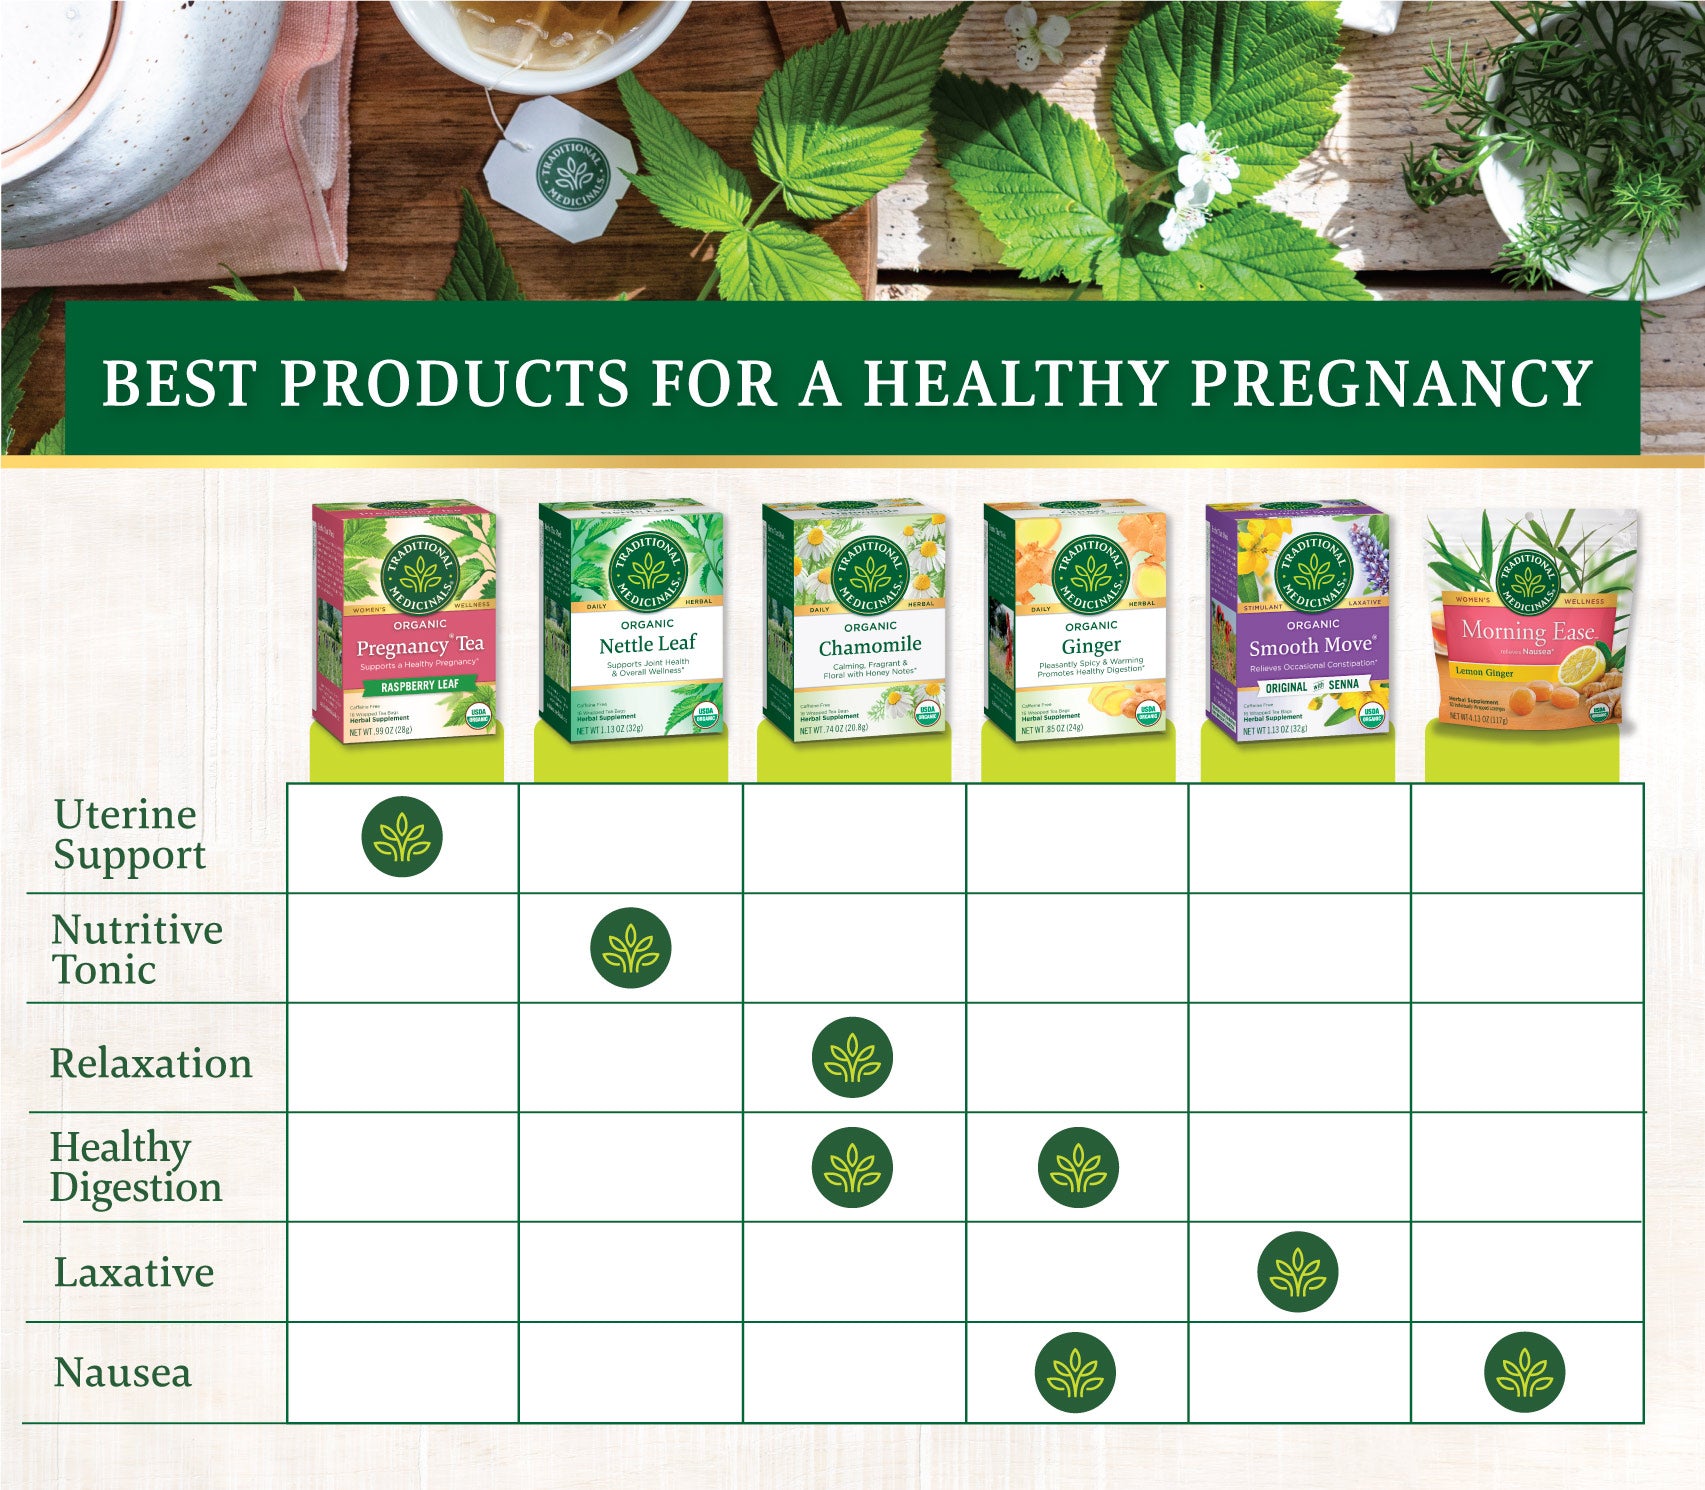 Best products for a healthy pregnancy infographic